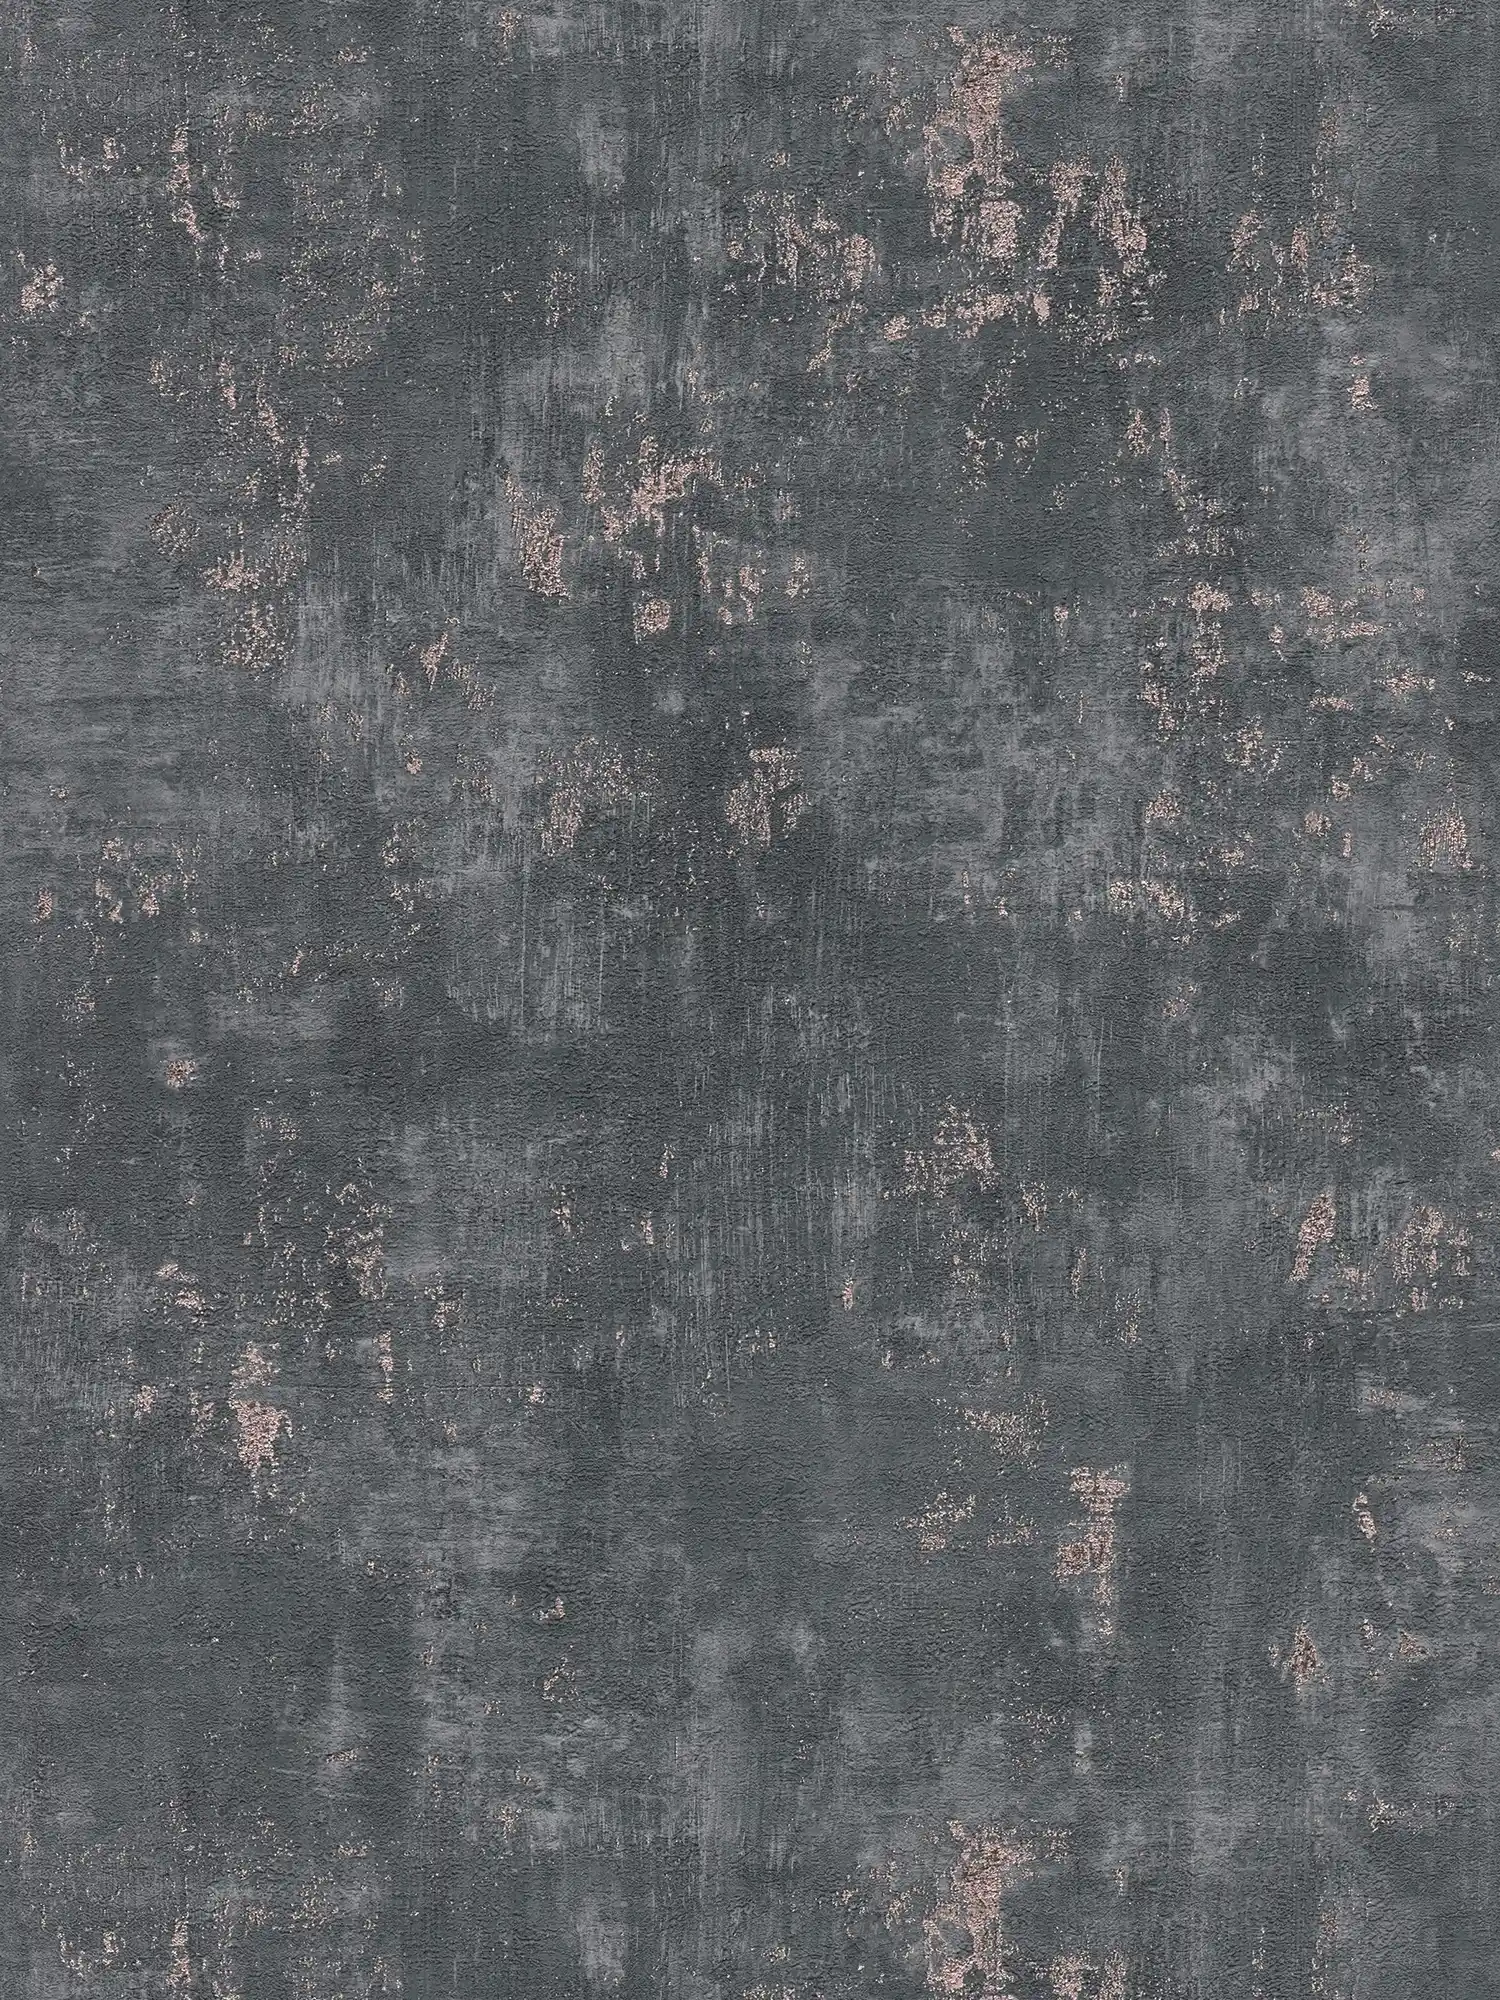 Used look wallpaper with metallic accents - black, rose gold
